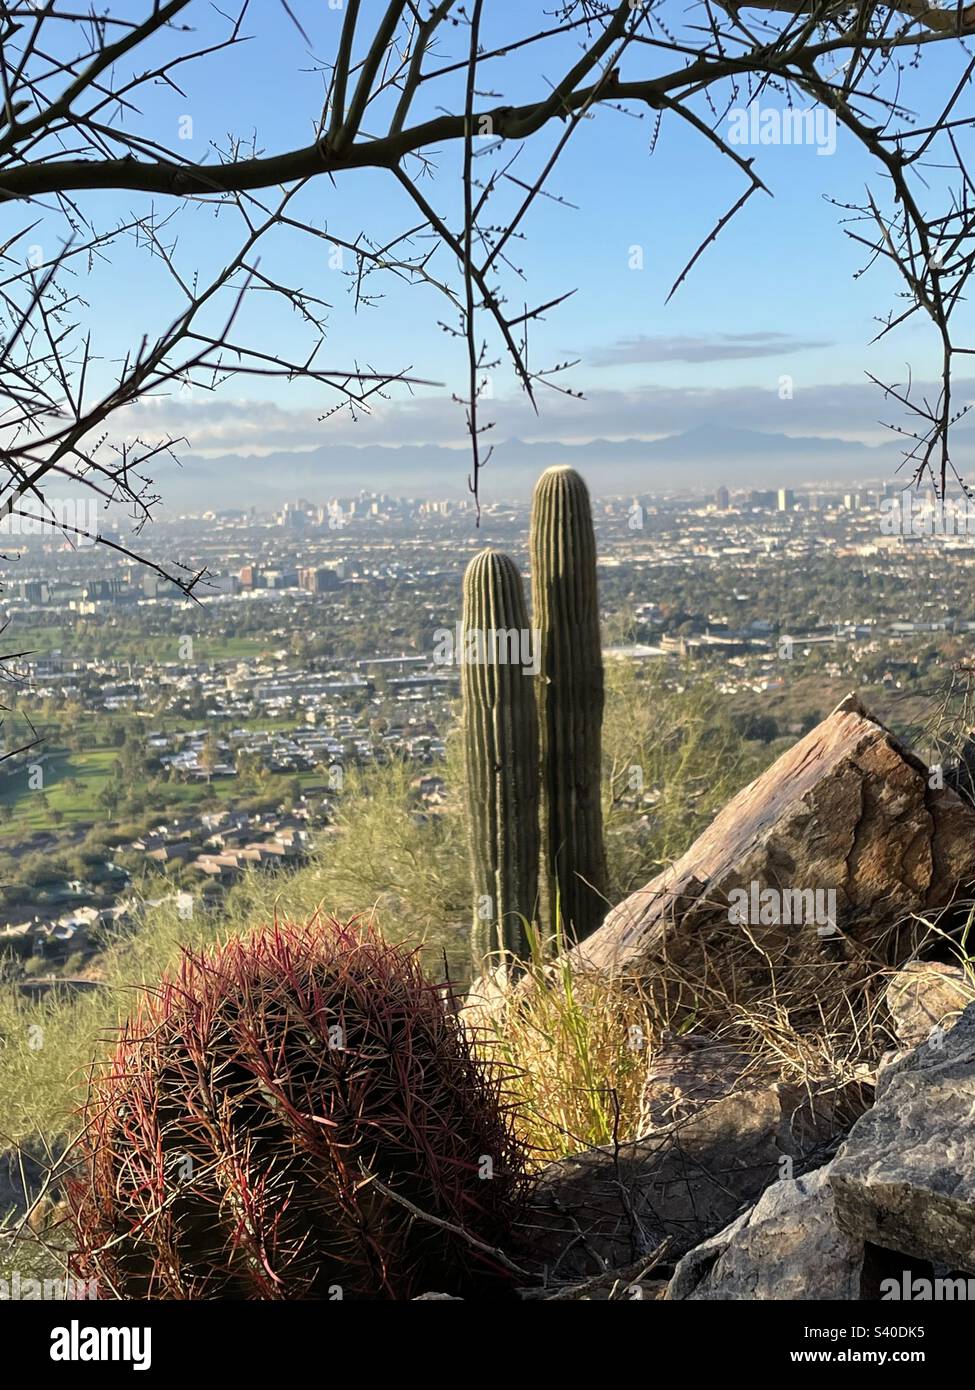 Beneath the barbs of a Palo Verde tree, a barrel cactus and saguaro cacti overlook Biltmore Estates and Phoenix AZ skyline, from Phoenix Mountain Preserve, 32nd / Lincoln Drive Trailhead Stock Photo